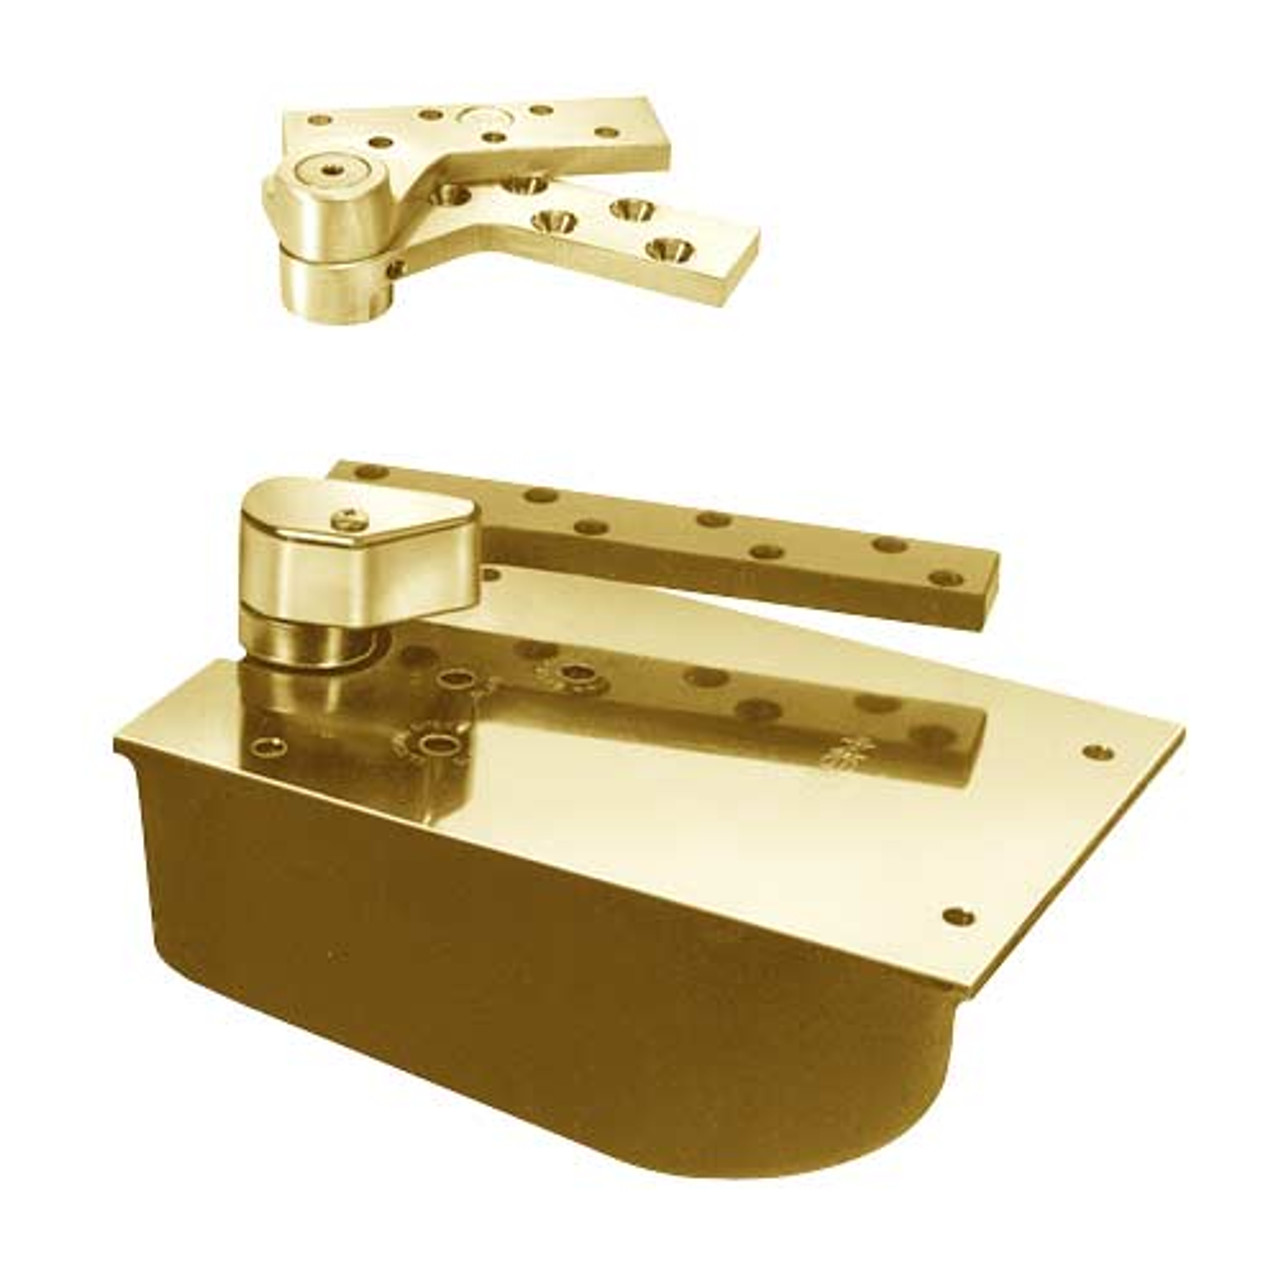 L27-105N-LFP-RH-2-605 Rixson 27 Series Extra Heavy Duty Lead Lined Offset Floor Closer in Bright Brass Finish